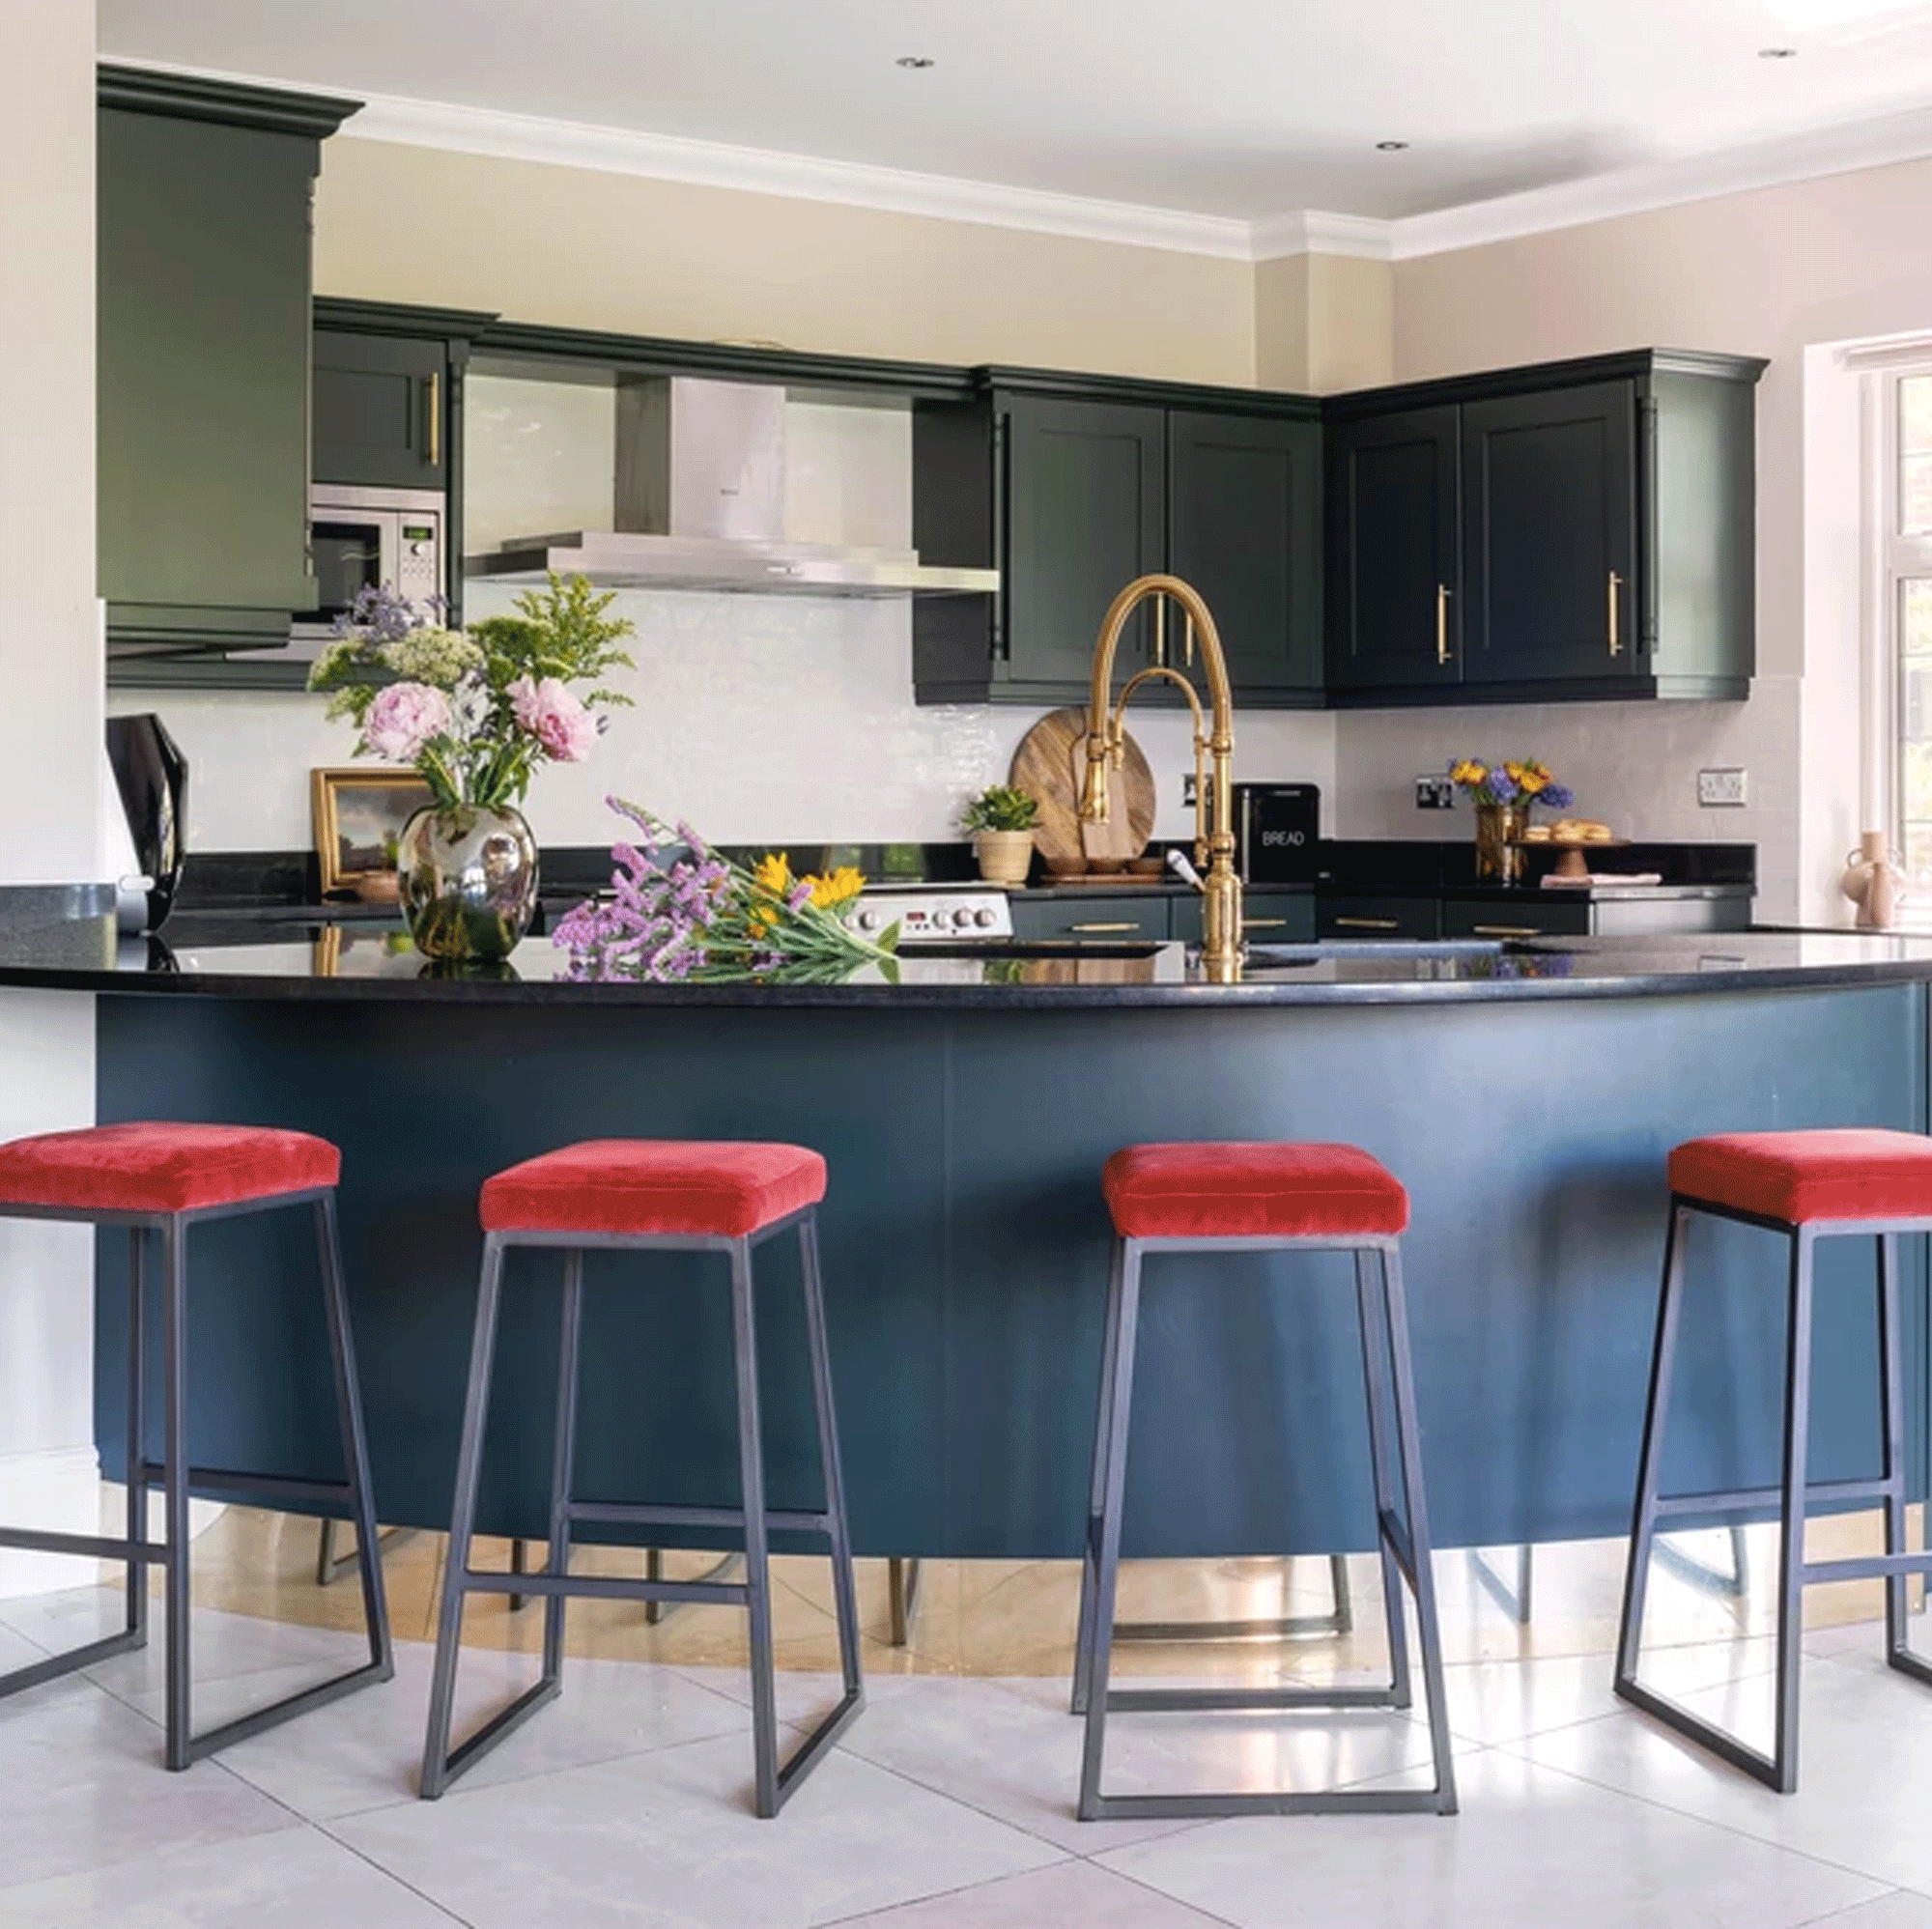 Blue curved kitchen island with red stools